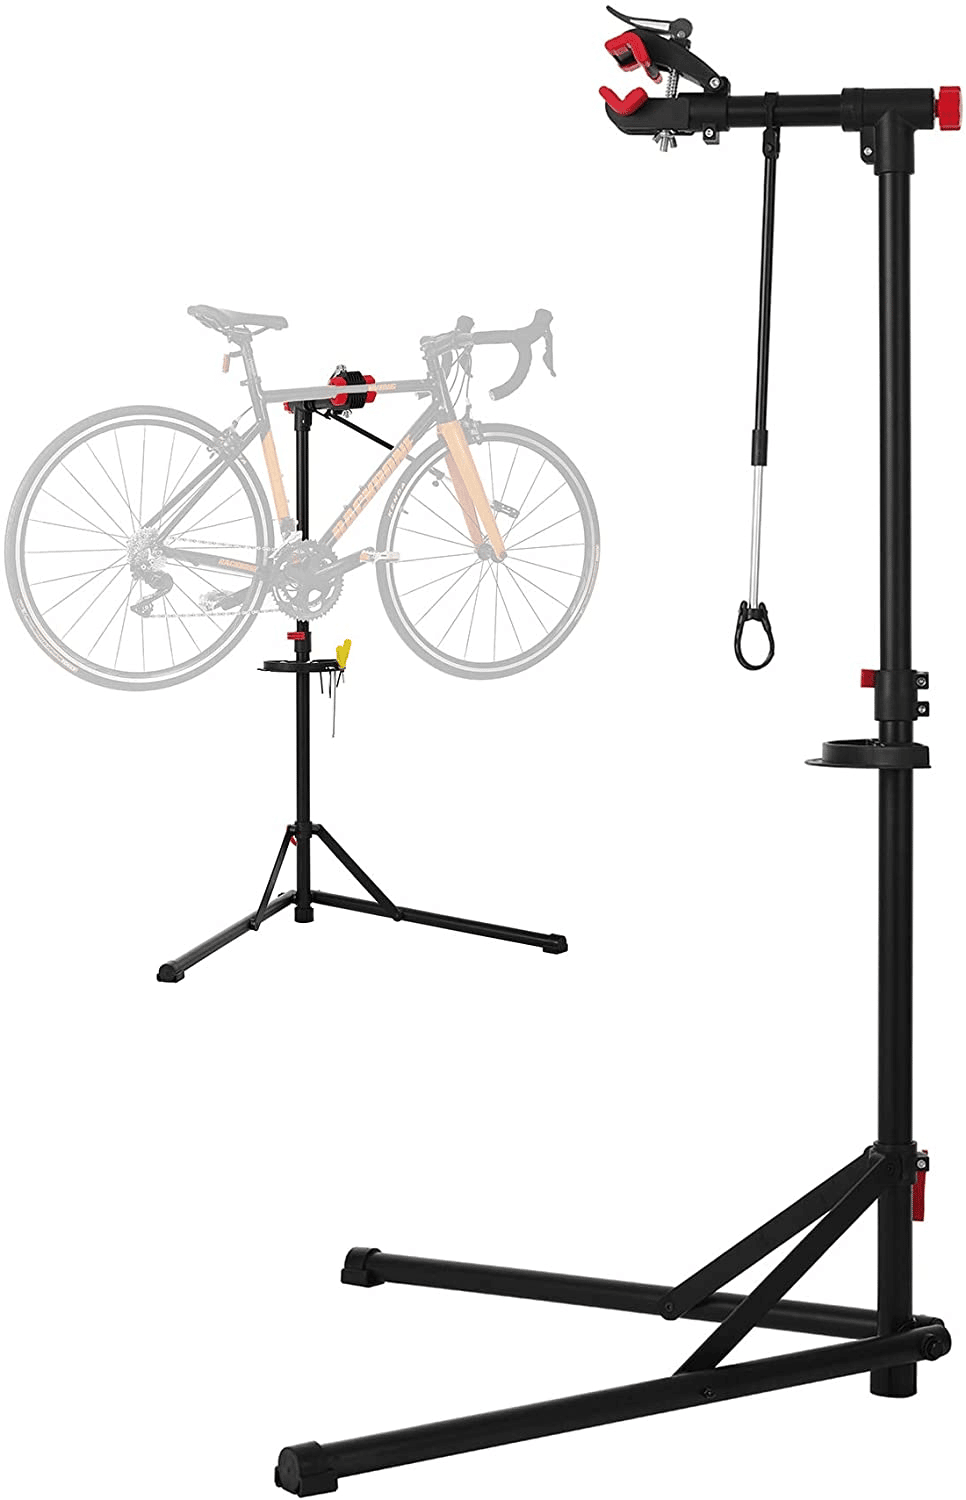 We suggest you use a portable bicycle stand like this when you need to do repairs to your mountain bike and it should be one of the essentials in your mountain bike tool collection.